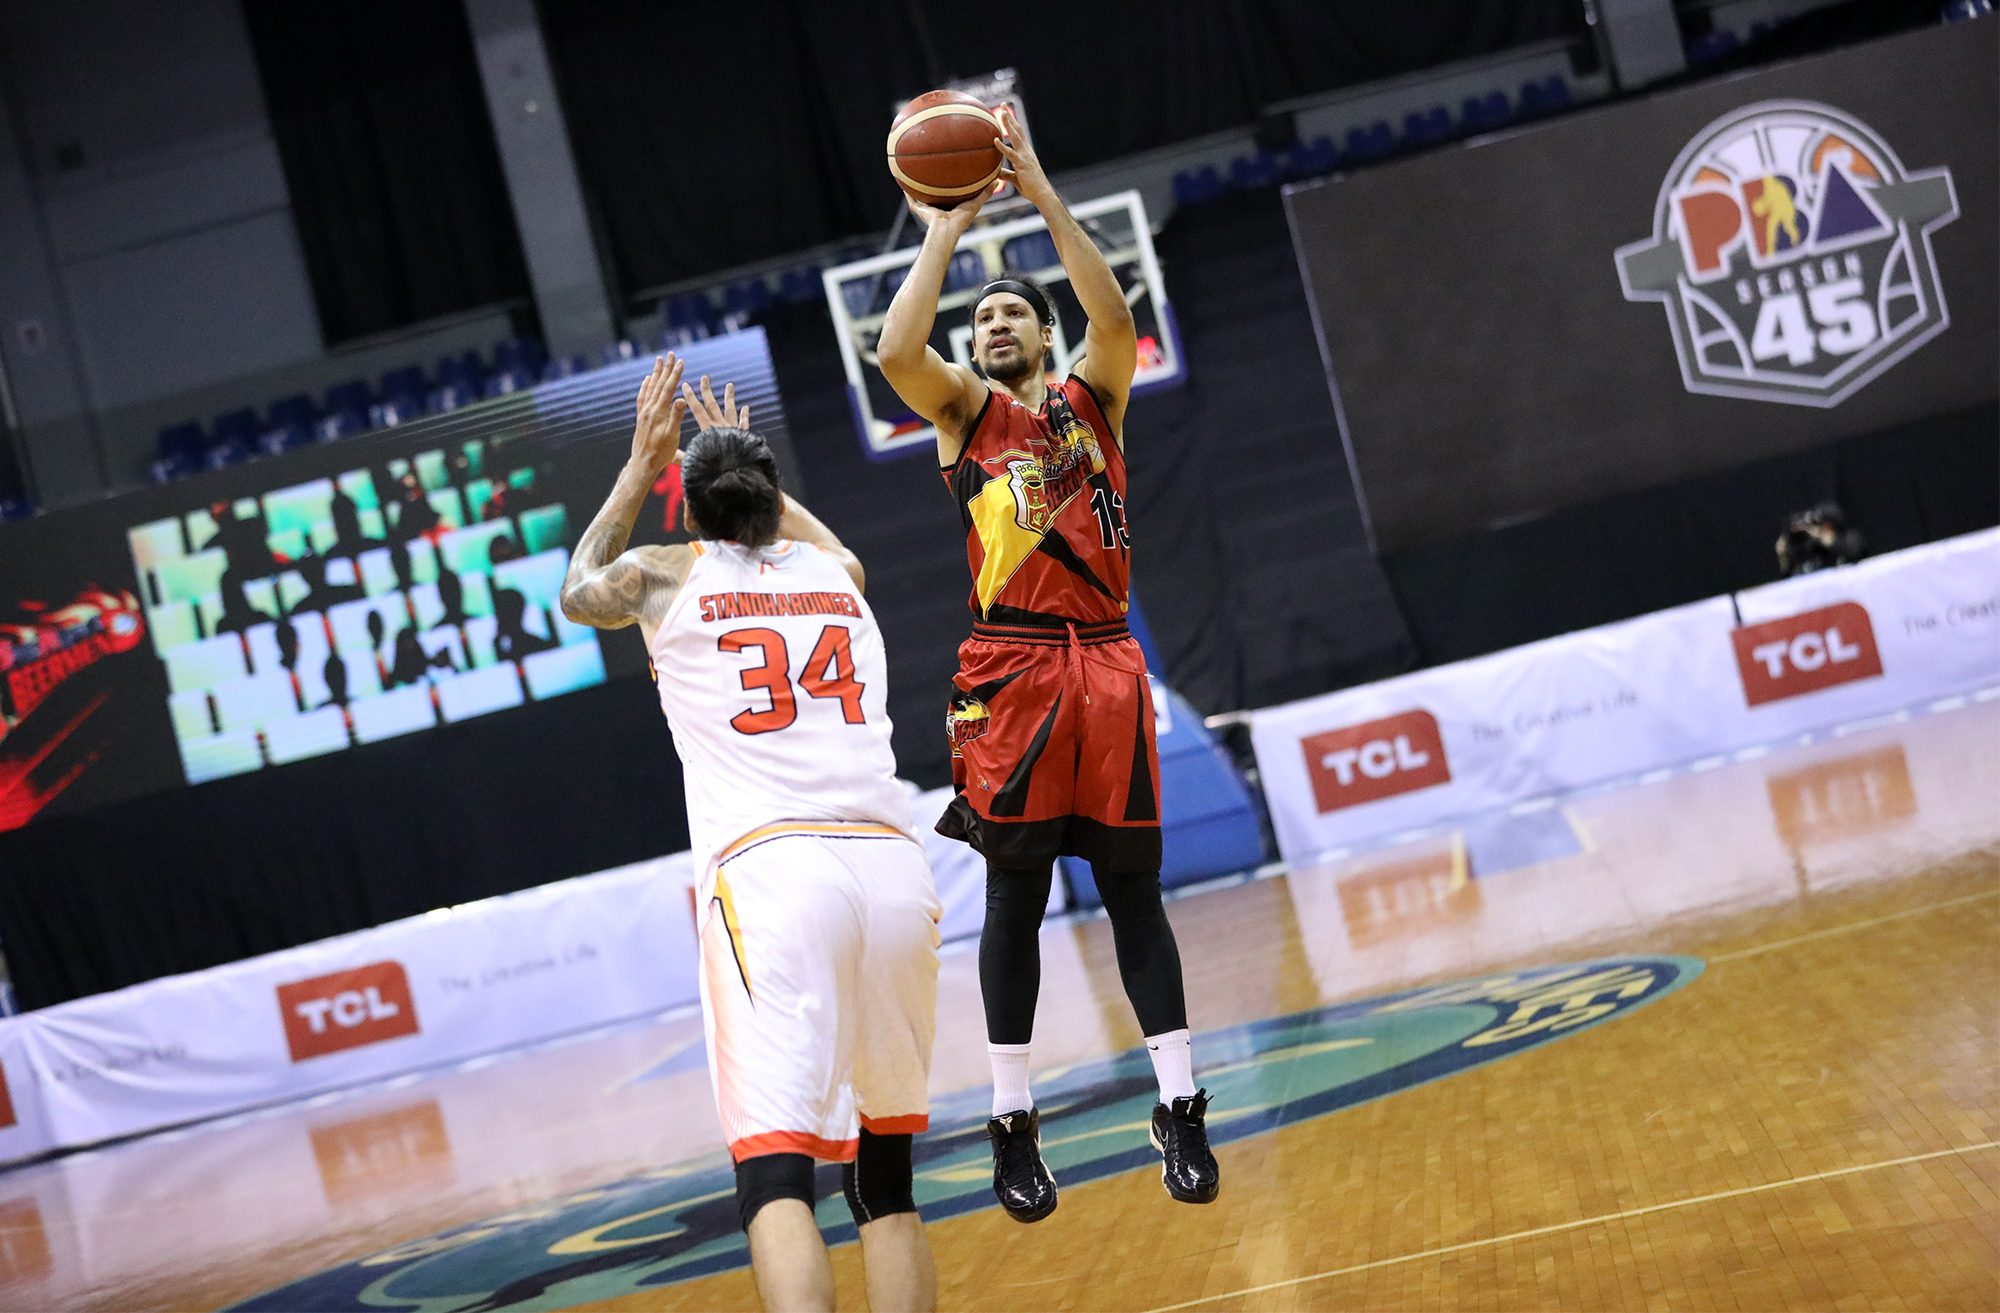 Banged-up SMB relieved with strong elims end in title defense